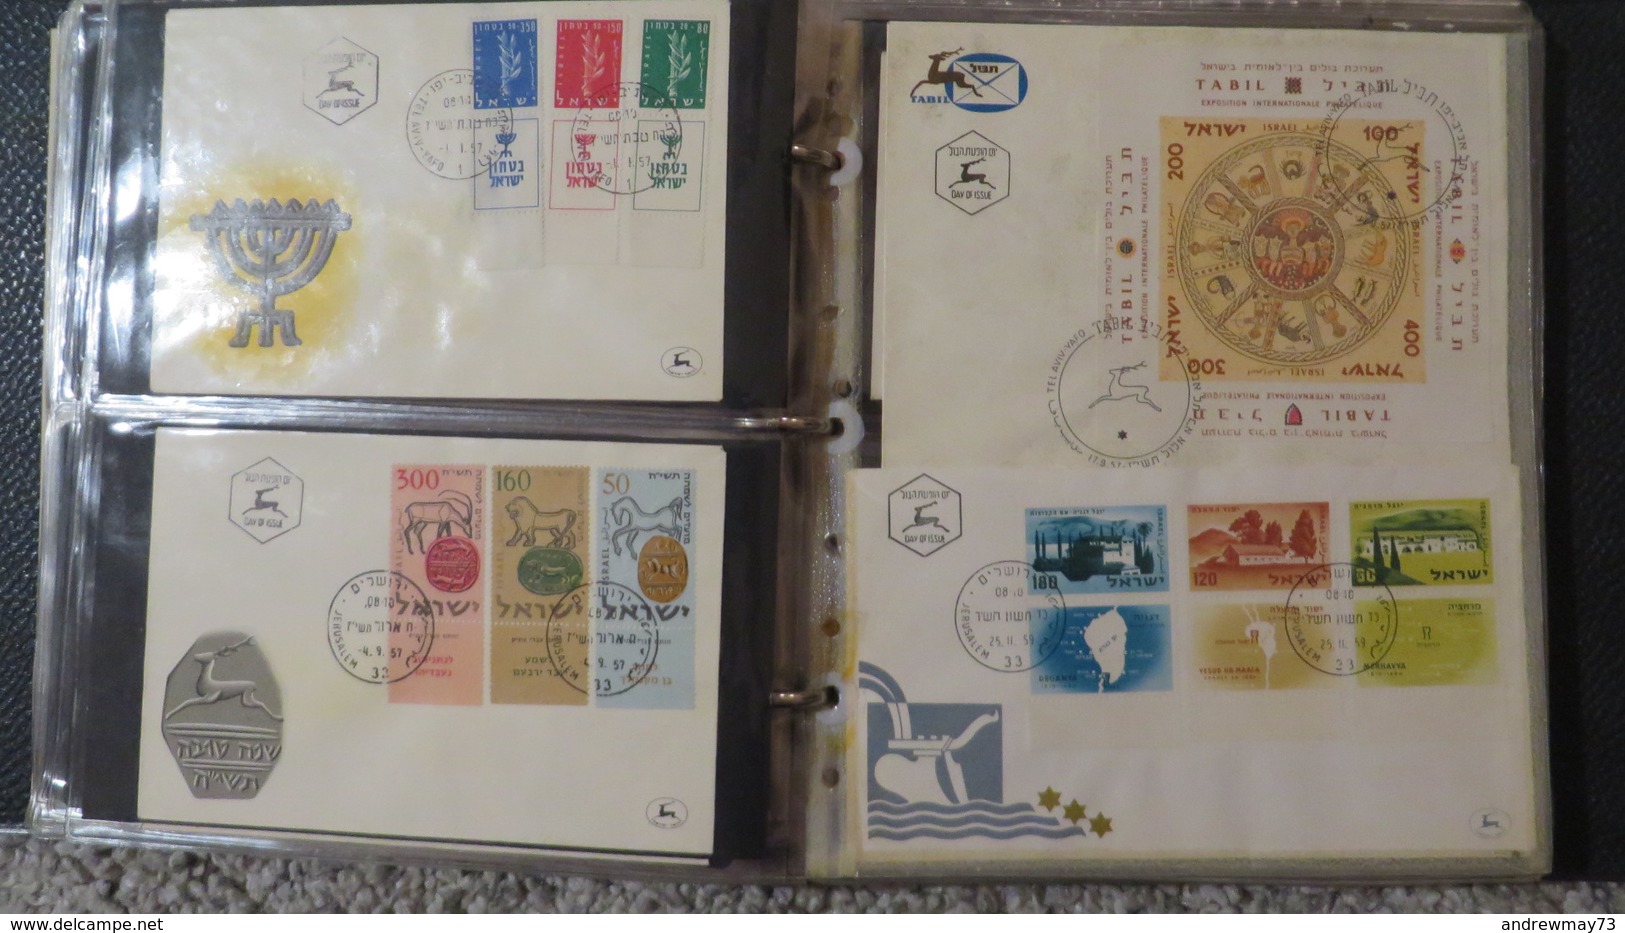 FDC COLLECTION- 8 BOOKS 615 FDC (480 FROM ITALY)